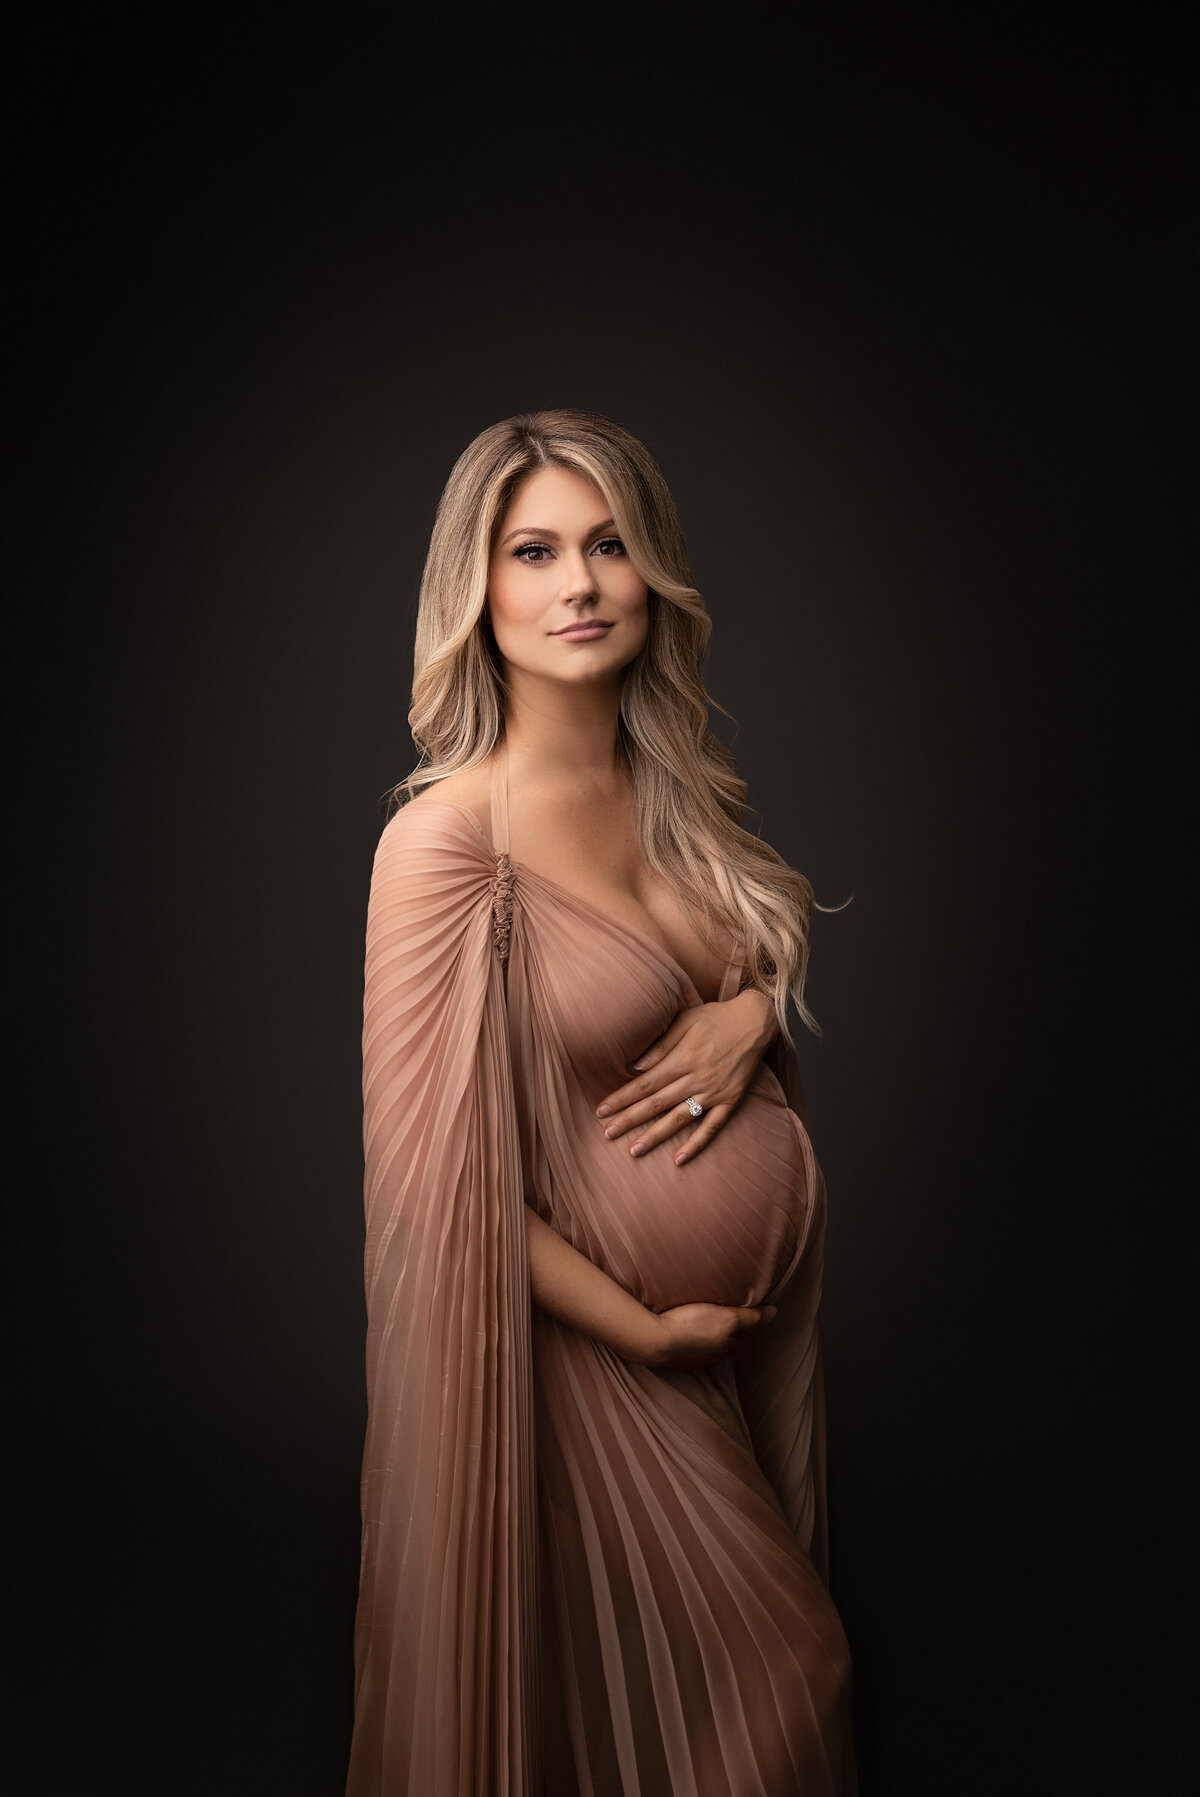 Best NJ maternity photographer, Katie Marshall, captures a fine art maternity photoshoot. Expectant mom in a long dusty pink maternity photoshoot gown with cape poses angled away from the camera. Her forearm is resting under her bump, her back arm resting above it. Her long blonde curled hair trails in front of her and she is looking at the camera with a closed-mouth smile.